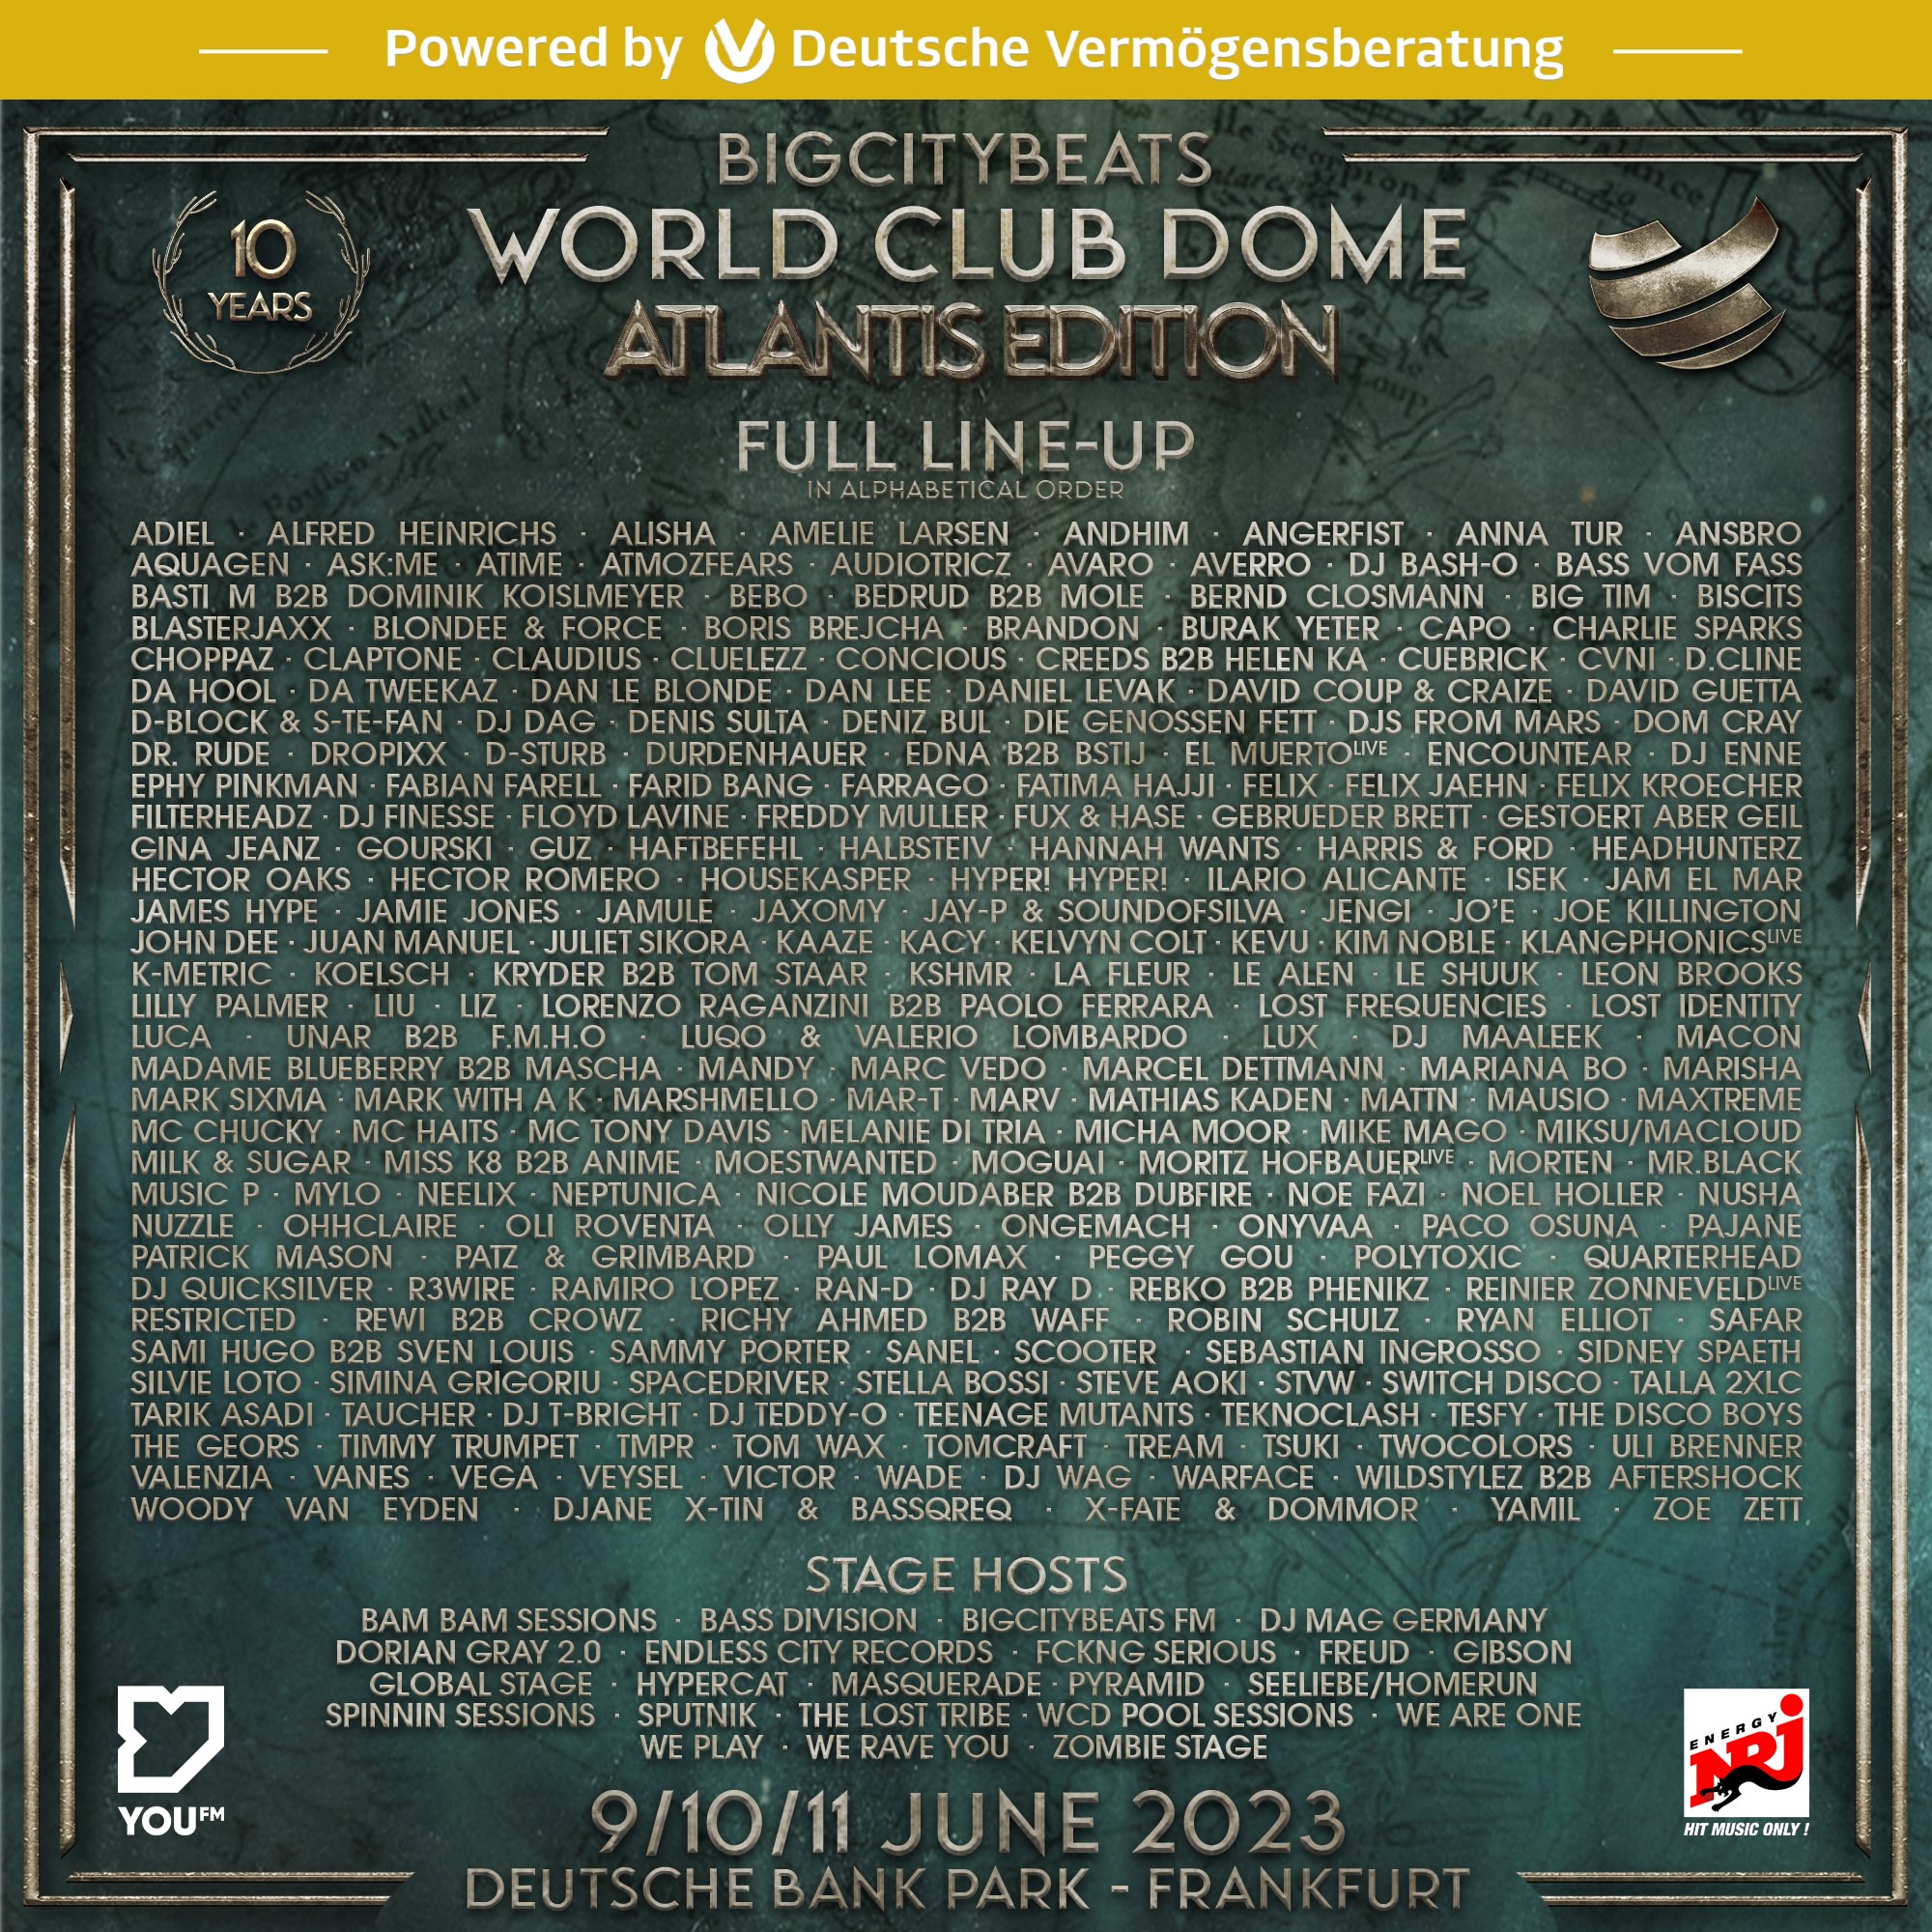 World Club Dome full line-up